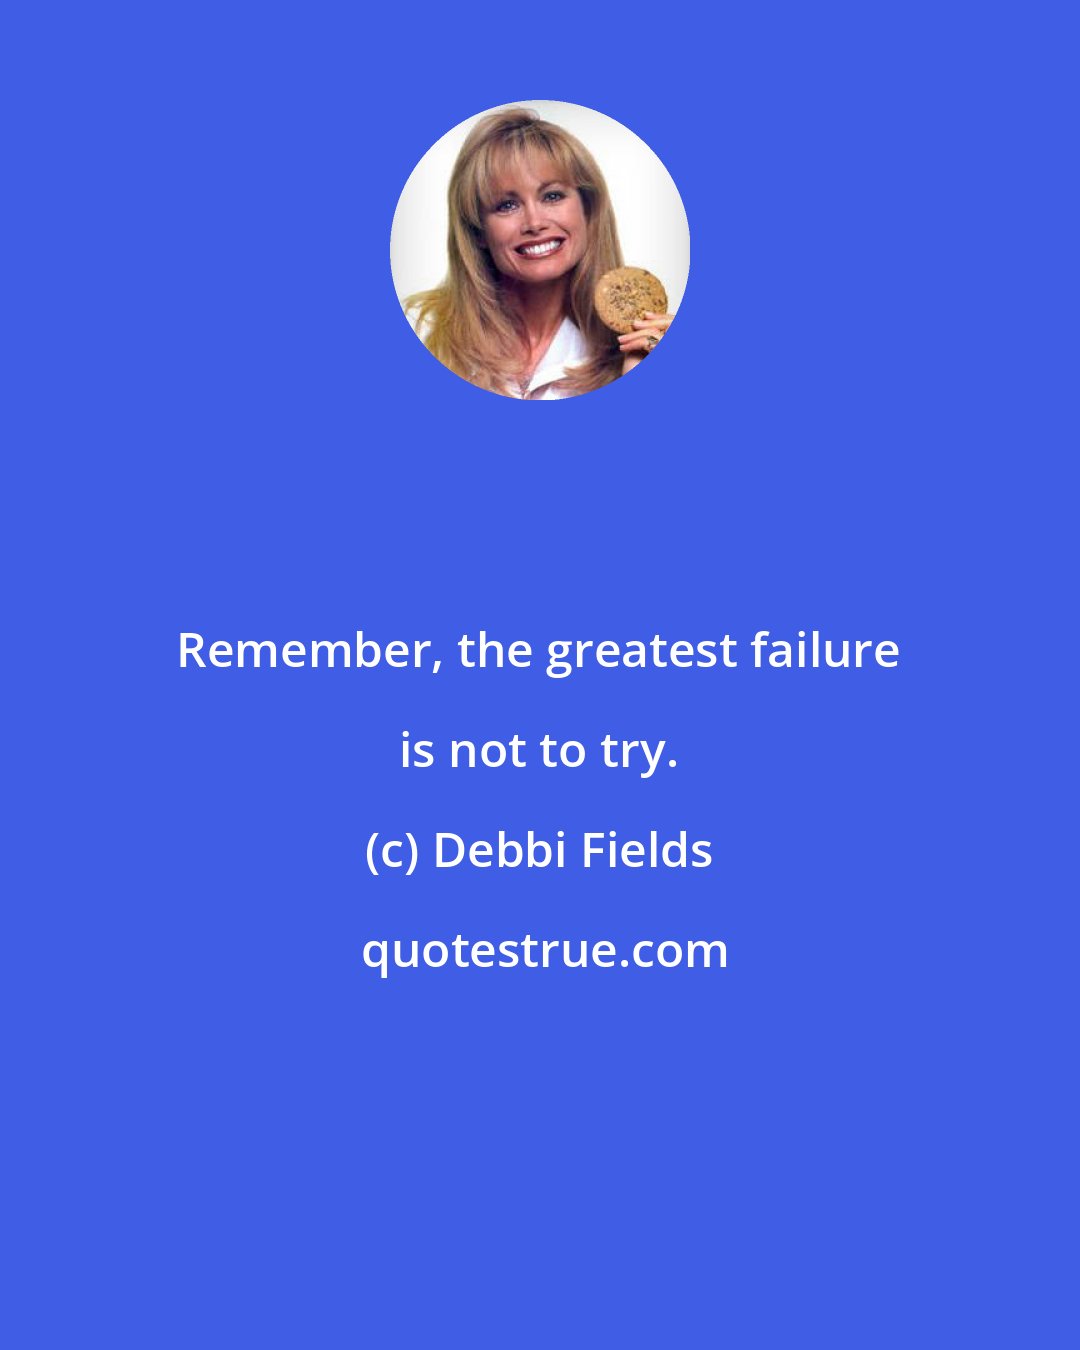 Debbi Fields: Remember, the greatest failure is not to try.